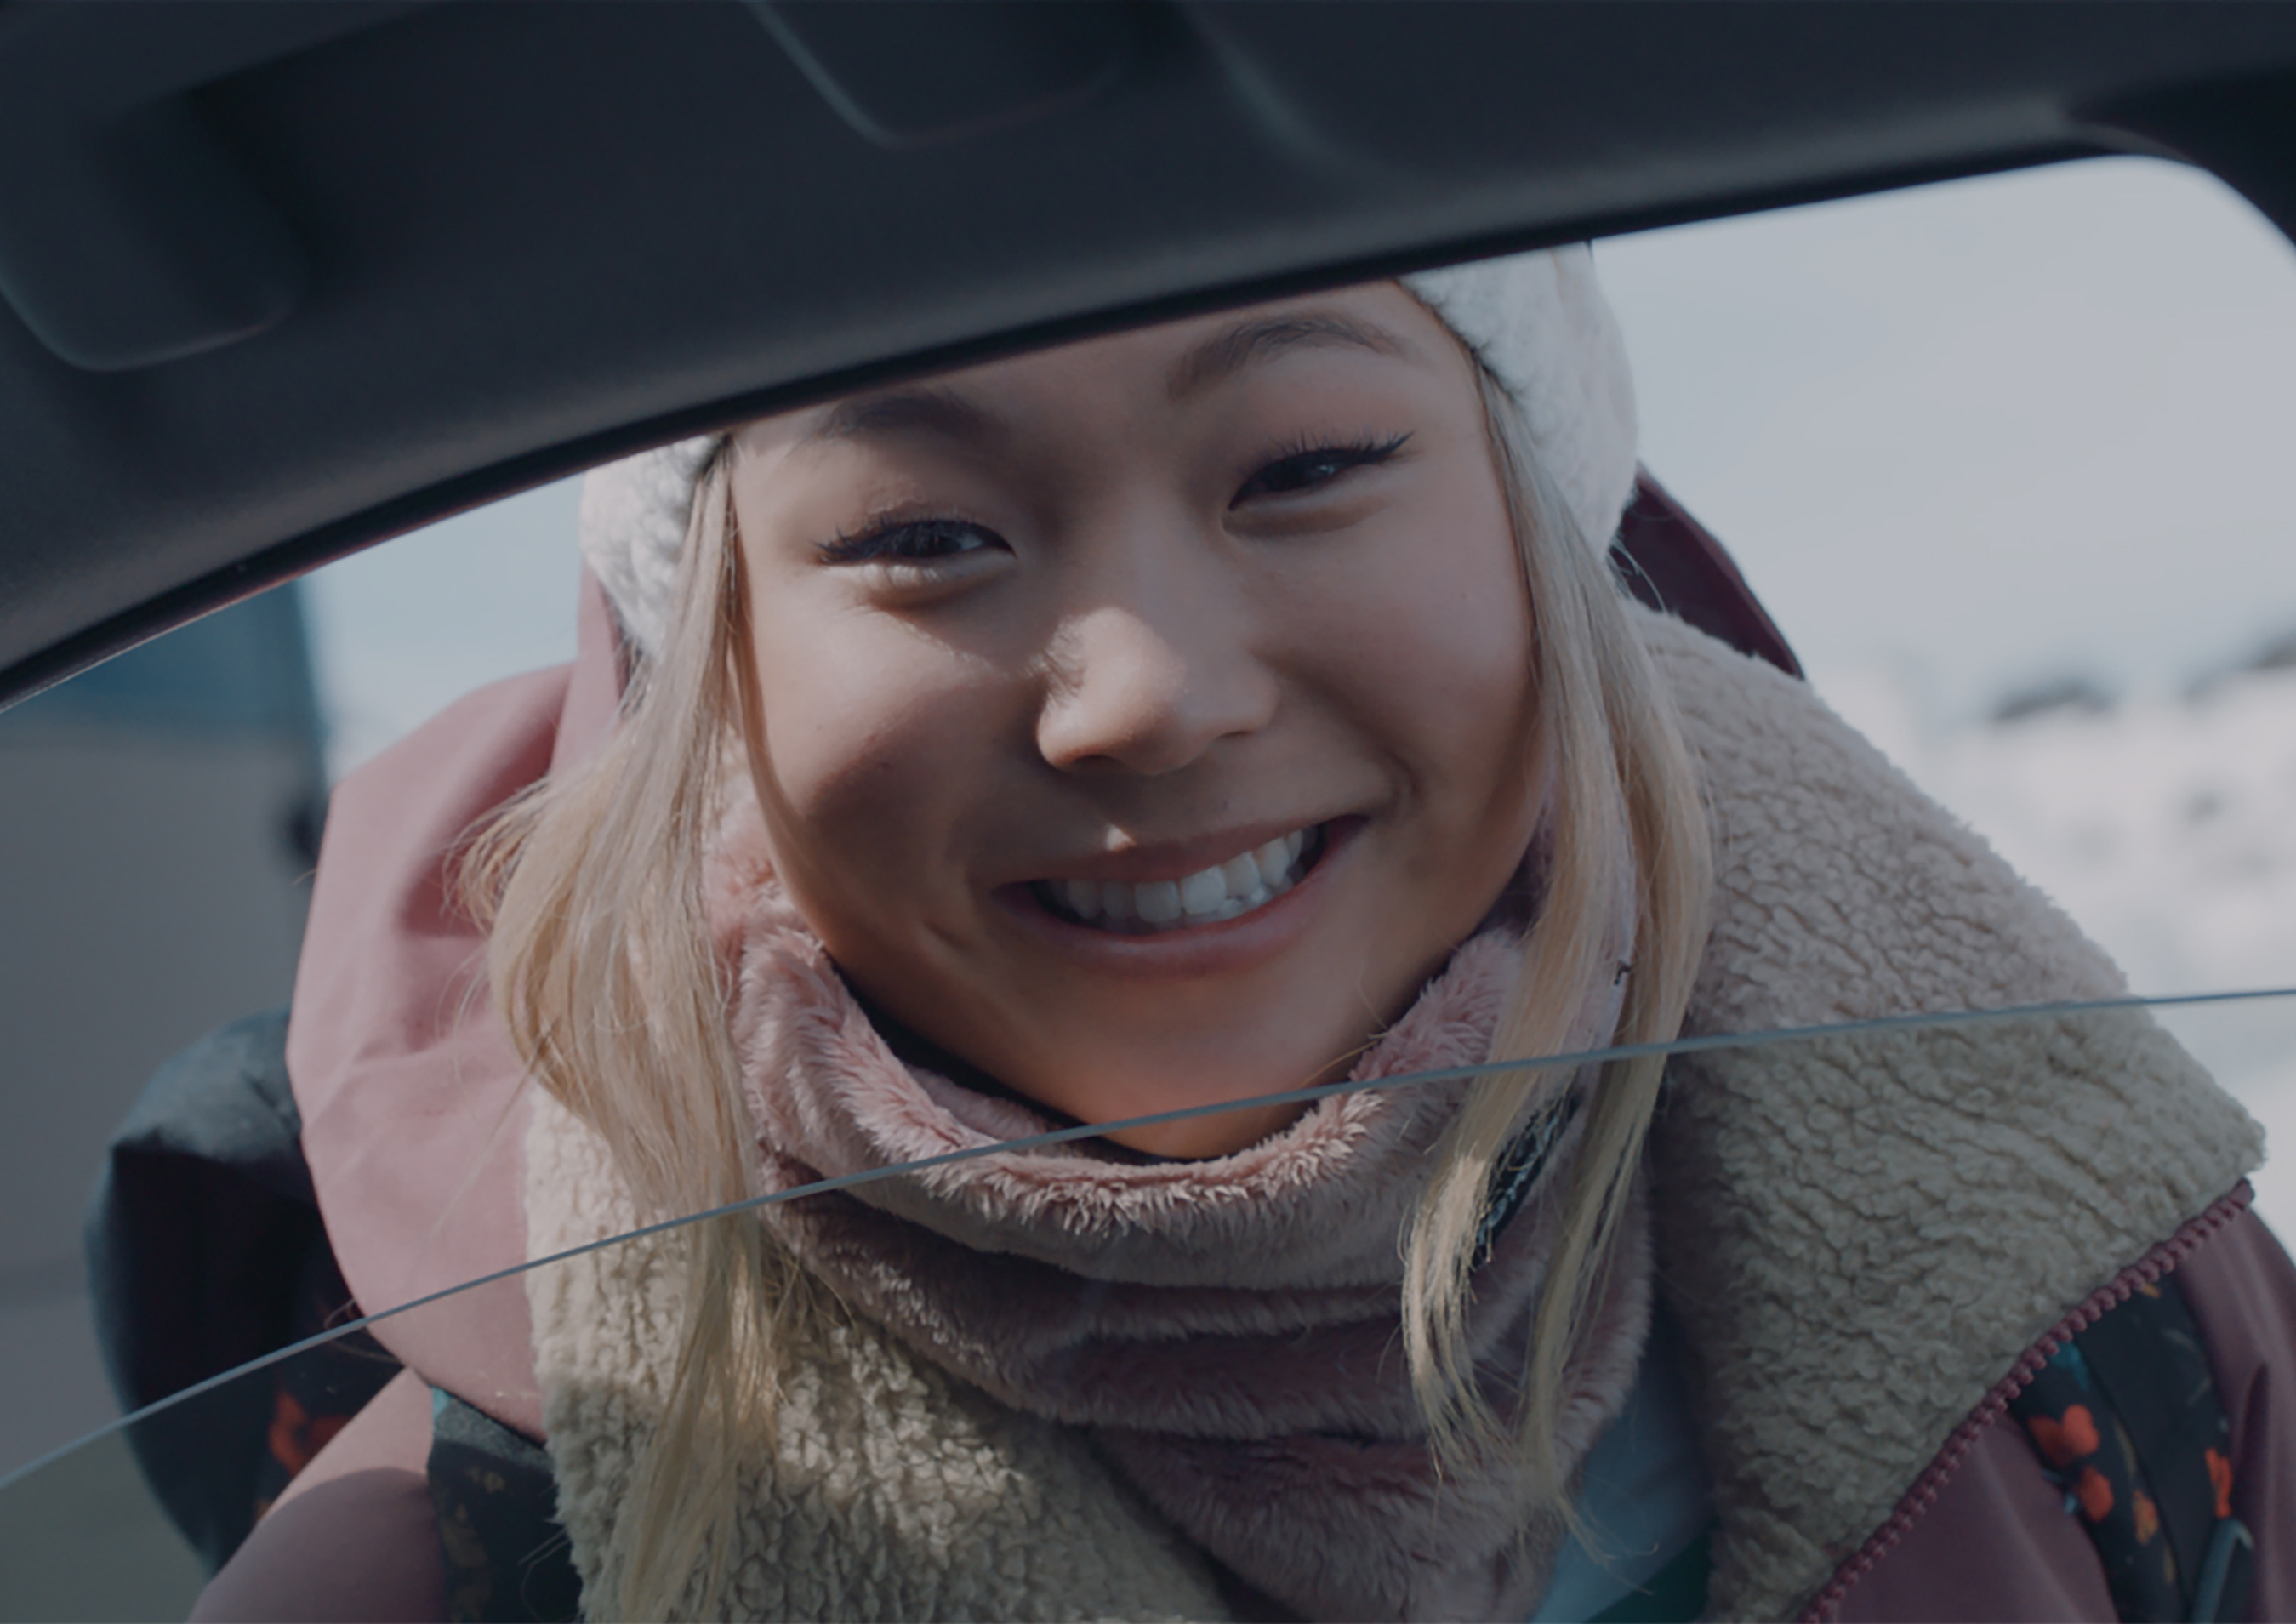 Olympic gold medalist and Team Toyota athlete Chloe Kim appears in Toyota’s new 2020 Prius ad, “To The Top.”